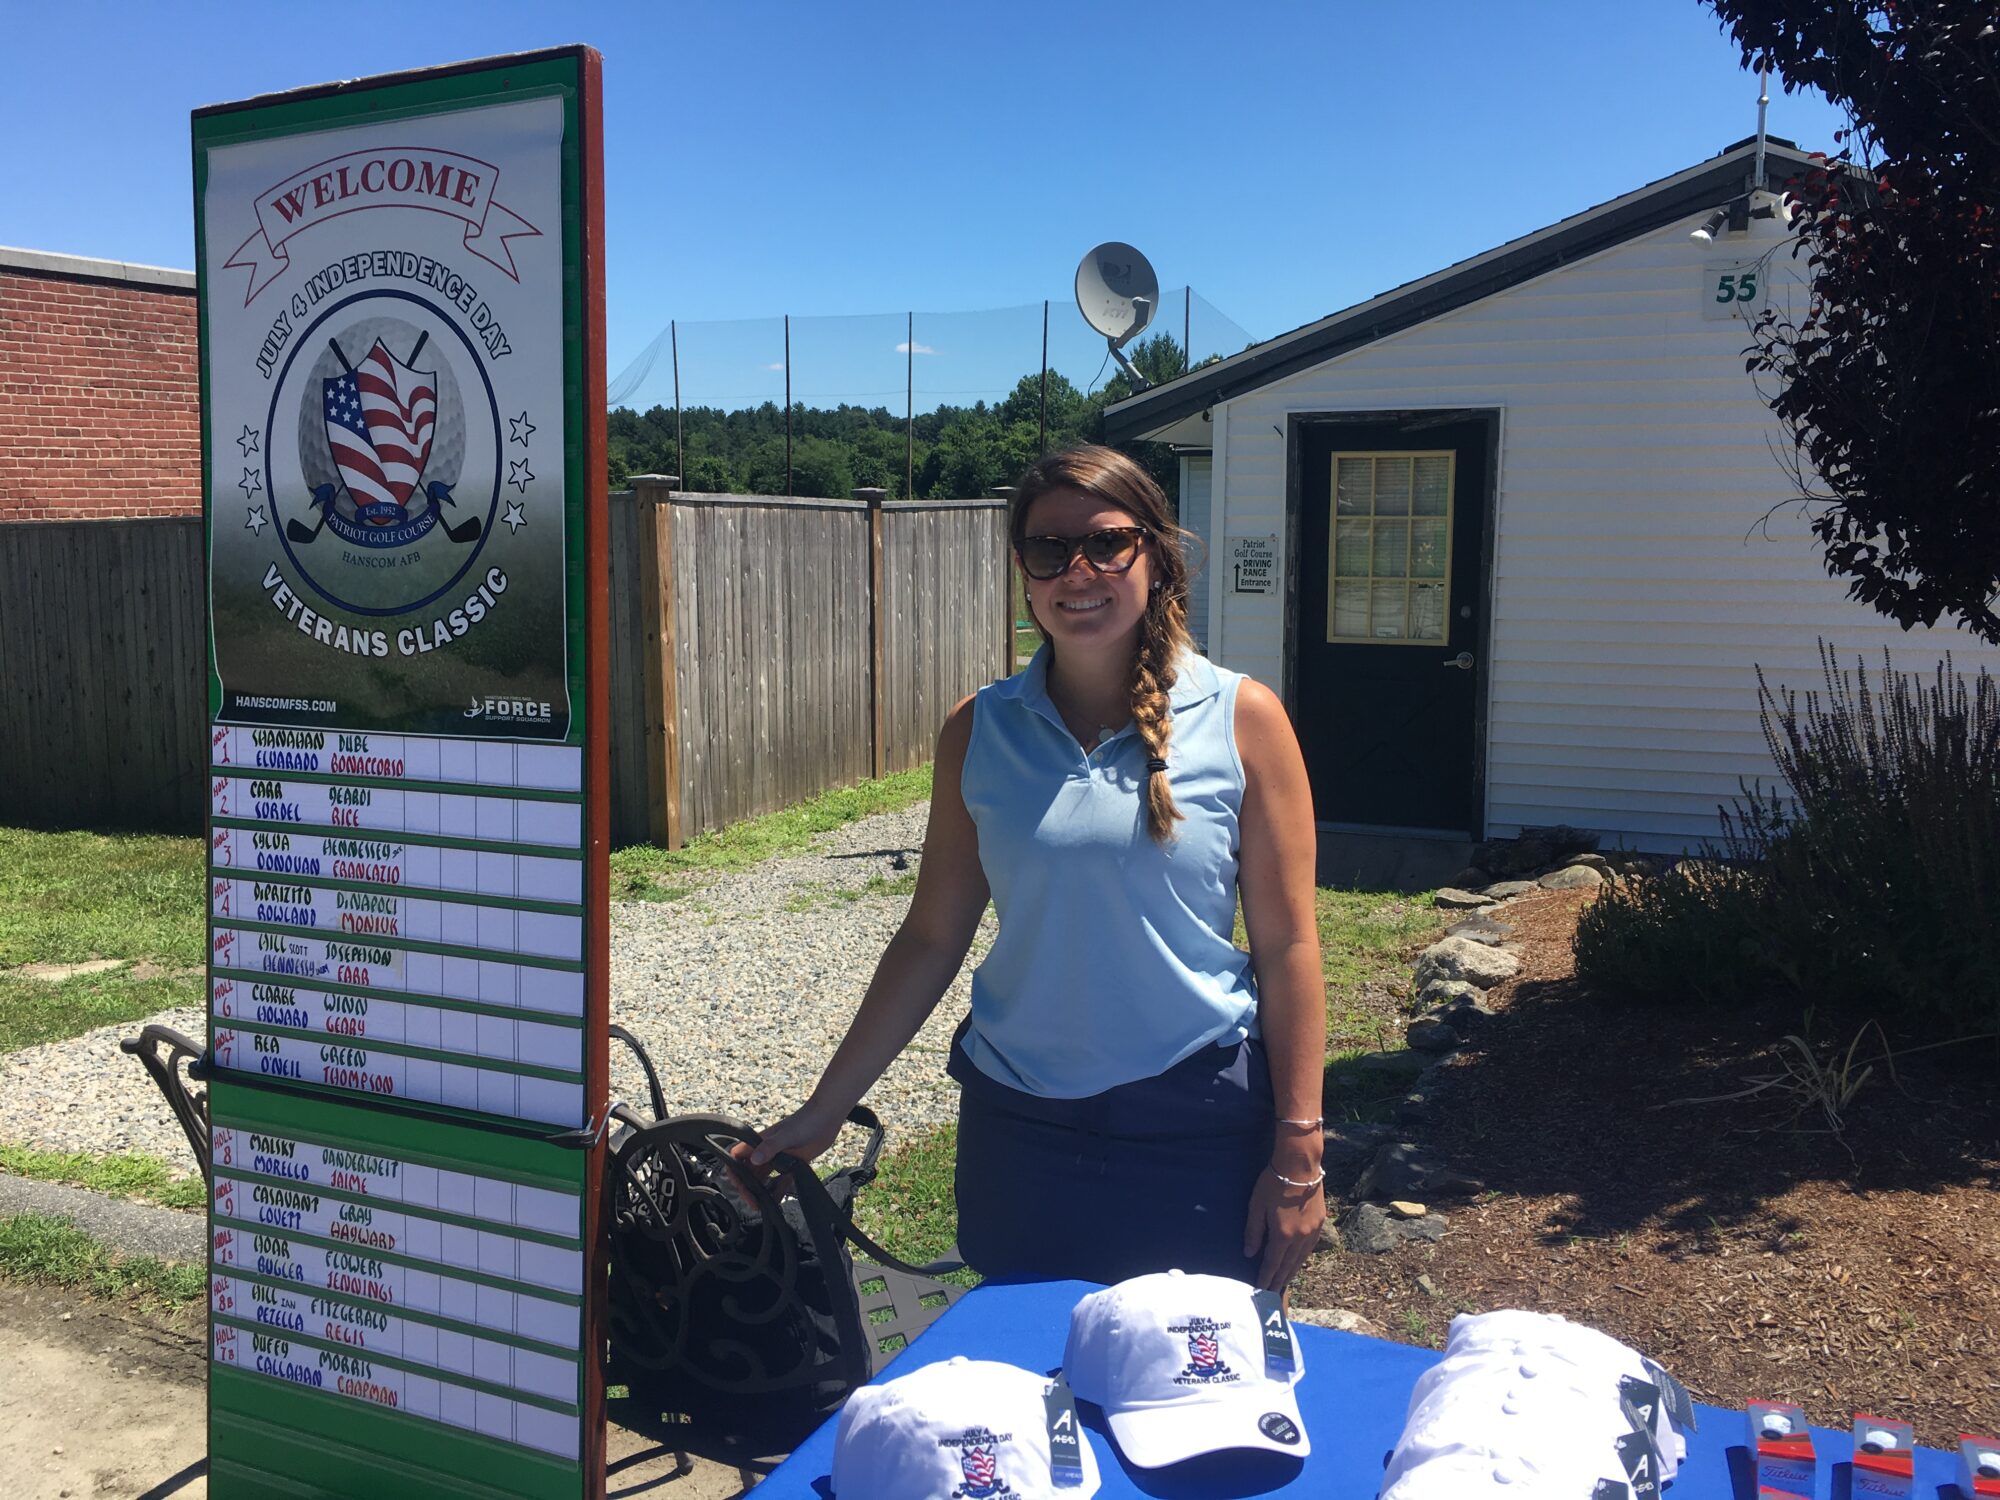 FROM LYNNFIELD TO FAR HILLS,  OUIMET ALUMNA ABIGAIL TOBIN CAN TRACE HER ROOTS THROUGH THE GAME OF GOLF